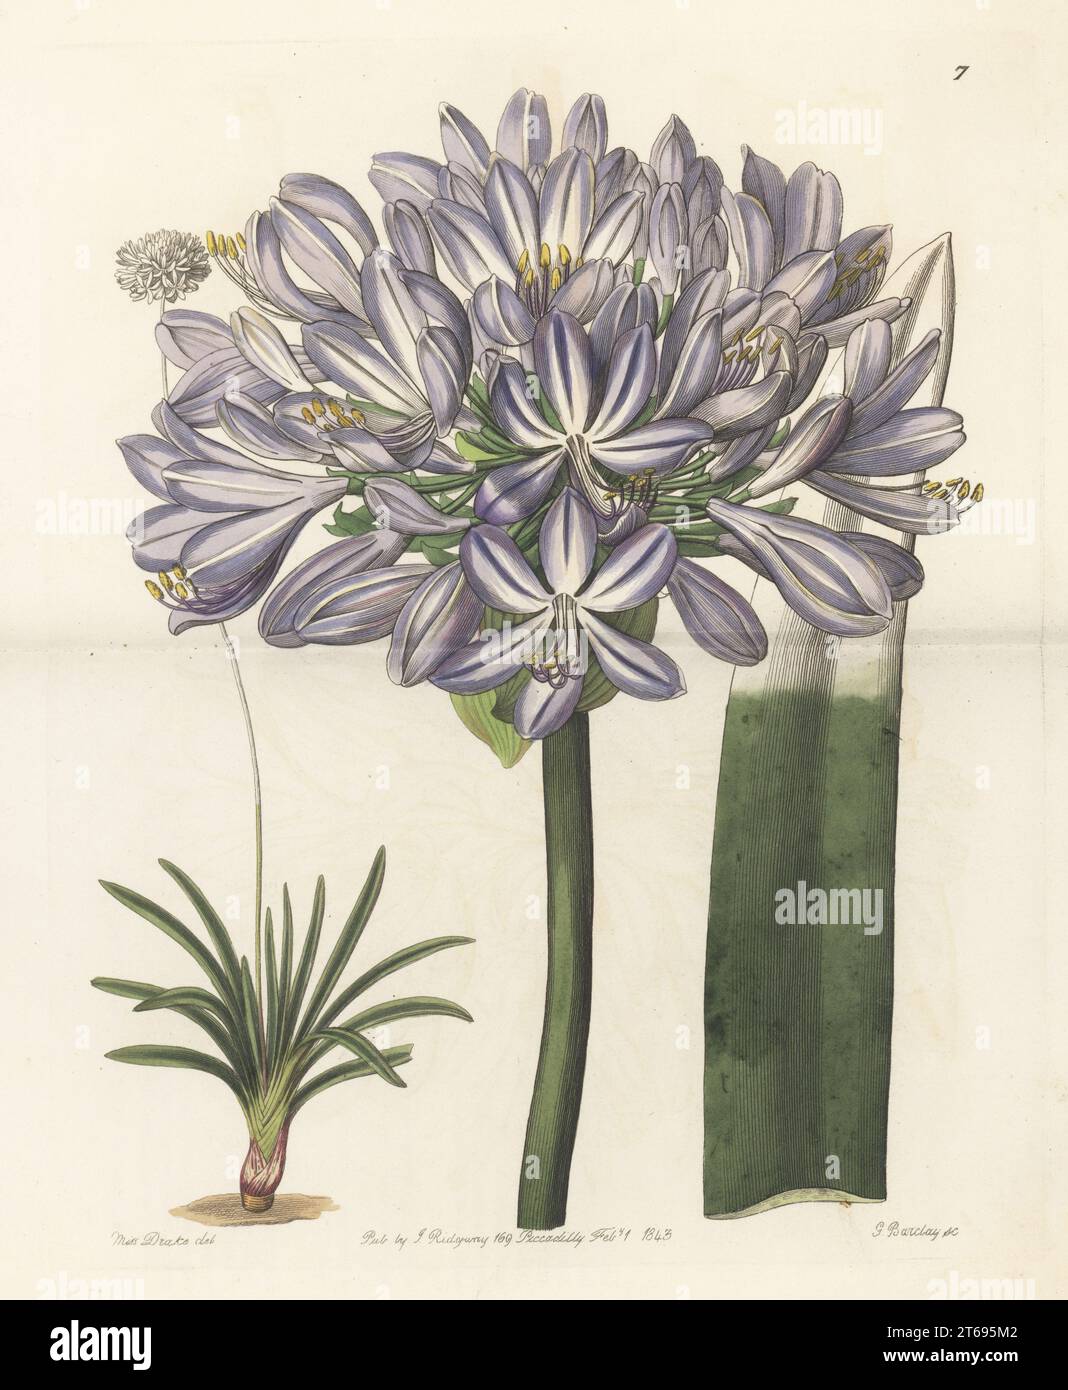 Agapanthus, blue lily or African lily, Agapanthus praecox subsp. orientalis. Native to Kwa-Zulu Natal and Western Cape, South Africa. Large-flowered African blue lily, Agapanthus umbellatus var. maximus. Handcoloured copperplate engraving by George Barclay after a botanical illustration by Sarah Drake from Edwards Botanical Register, continued by John Lindley, published by James Ridgway, London, 1843. Stock Photo